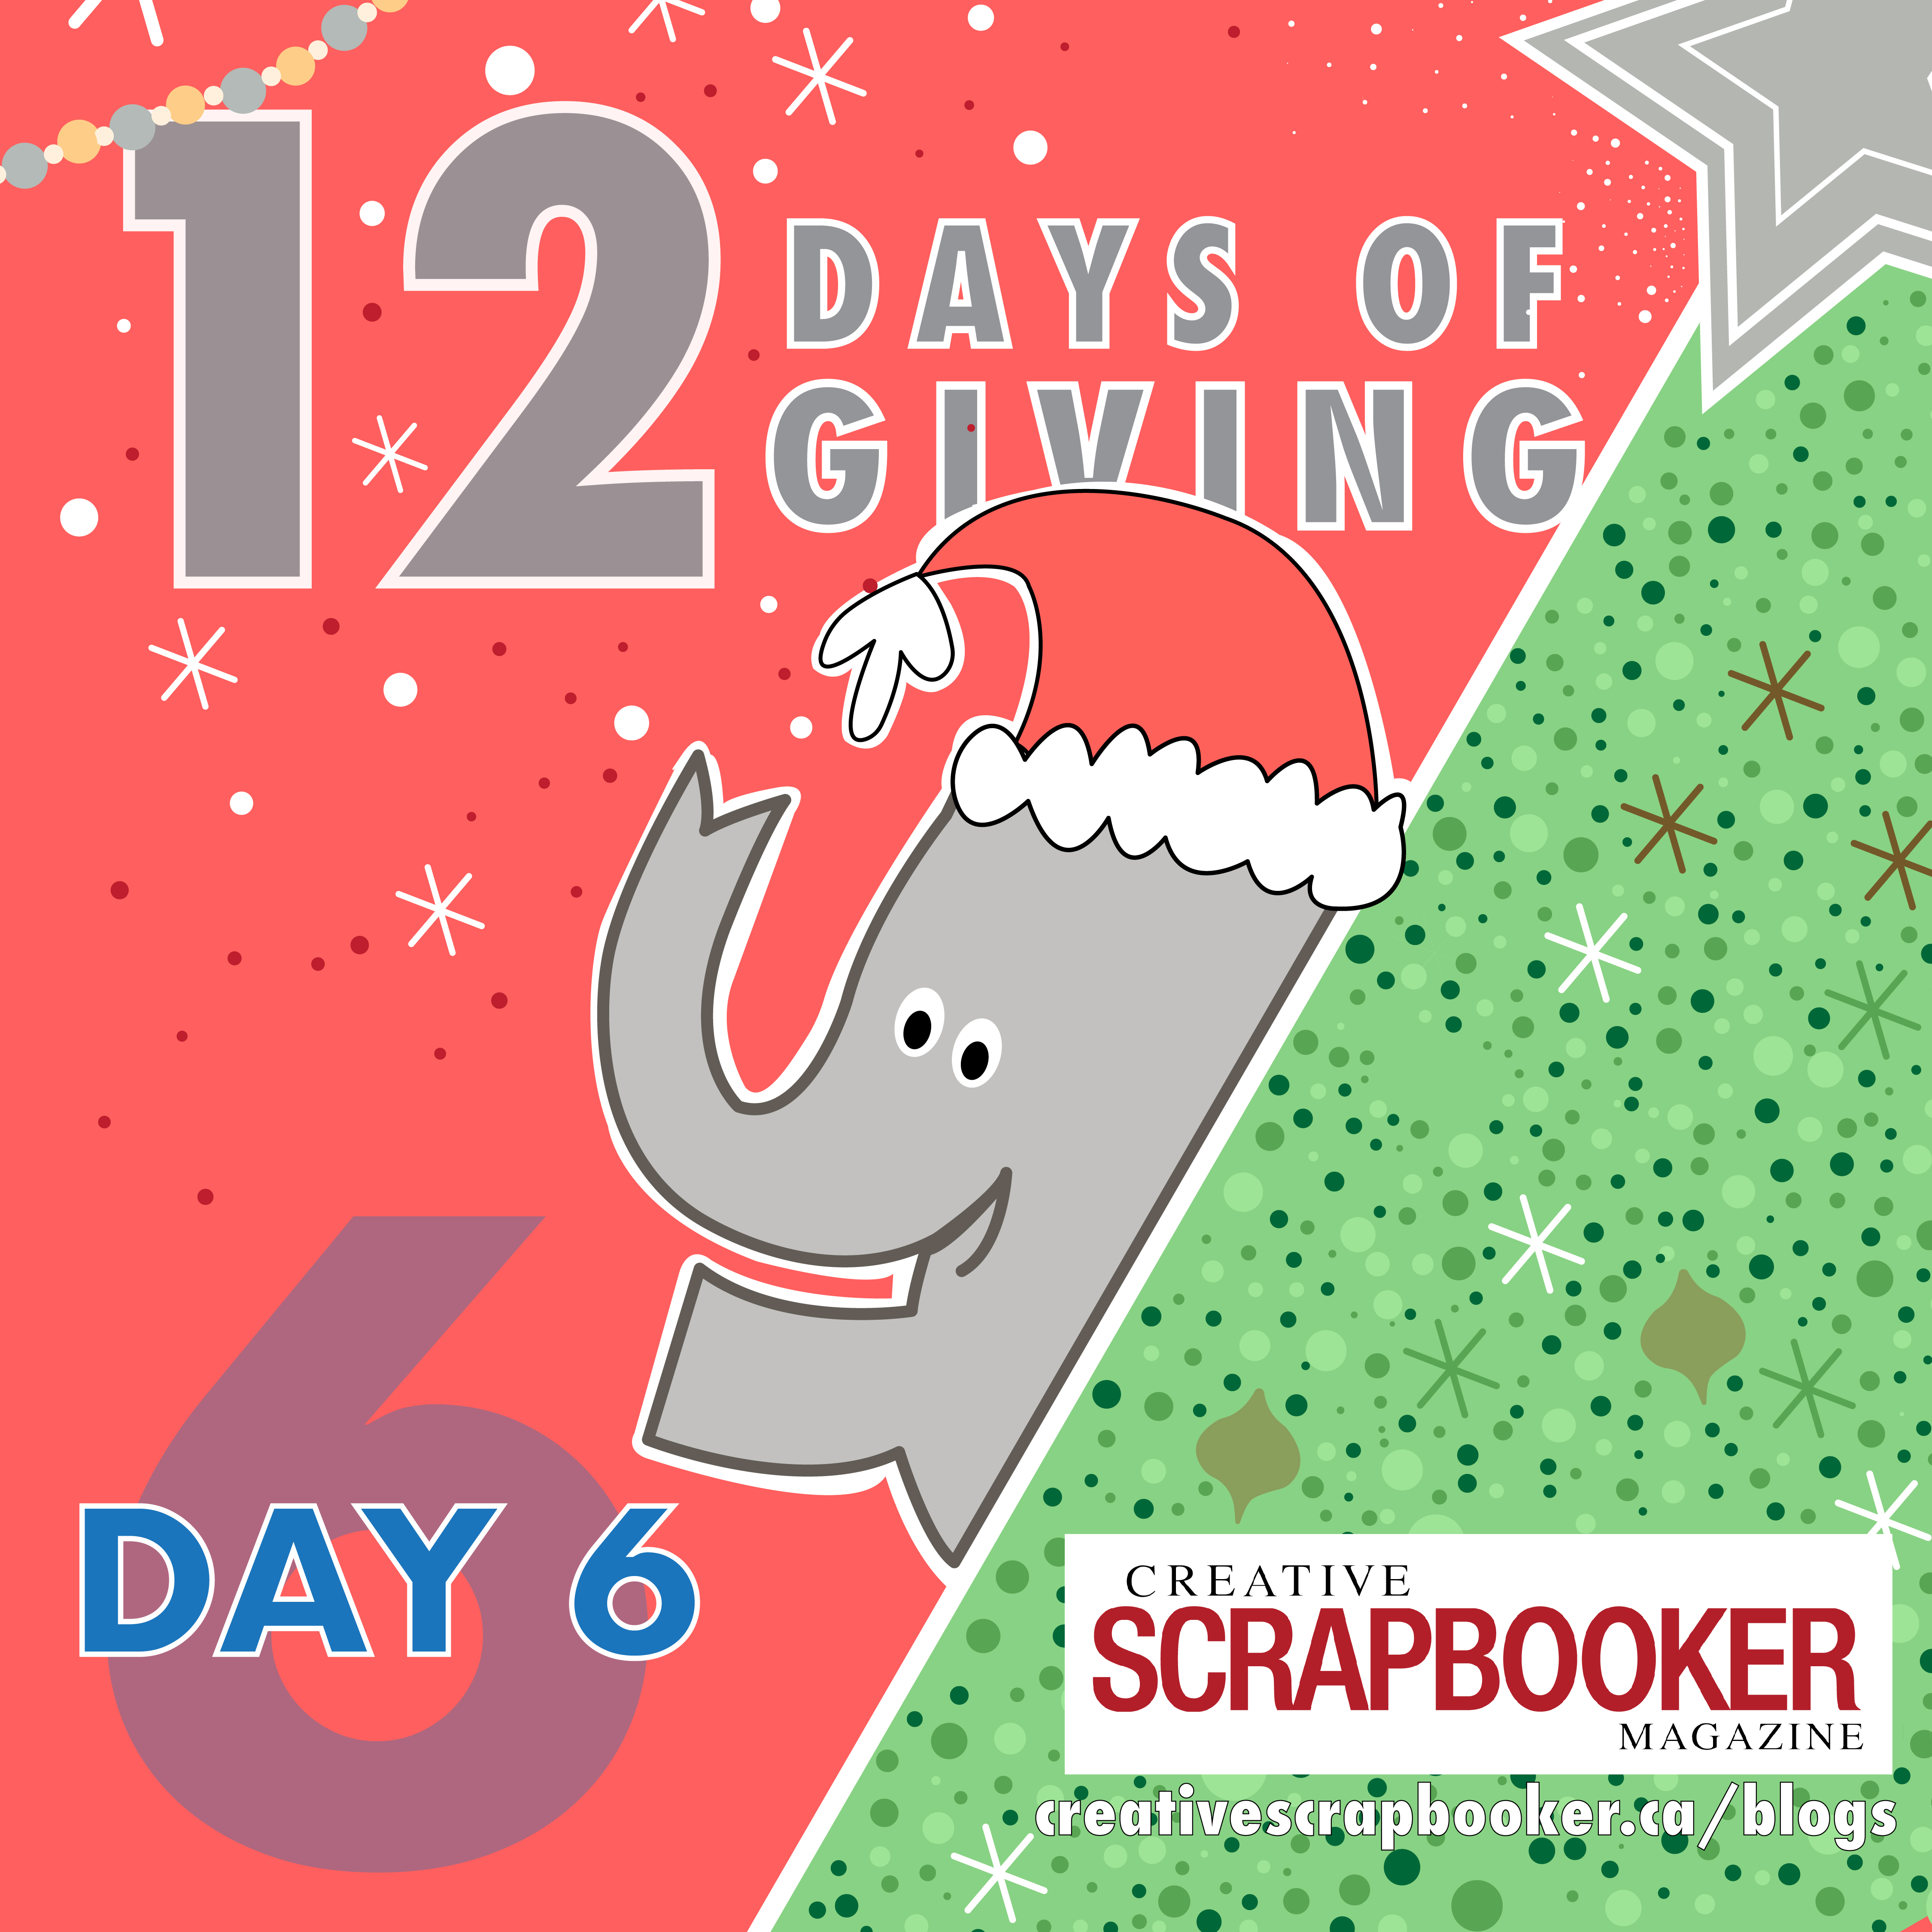 Day #6 12 Days of Giving with Creative Scrapbooker Magazine